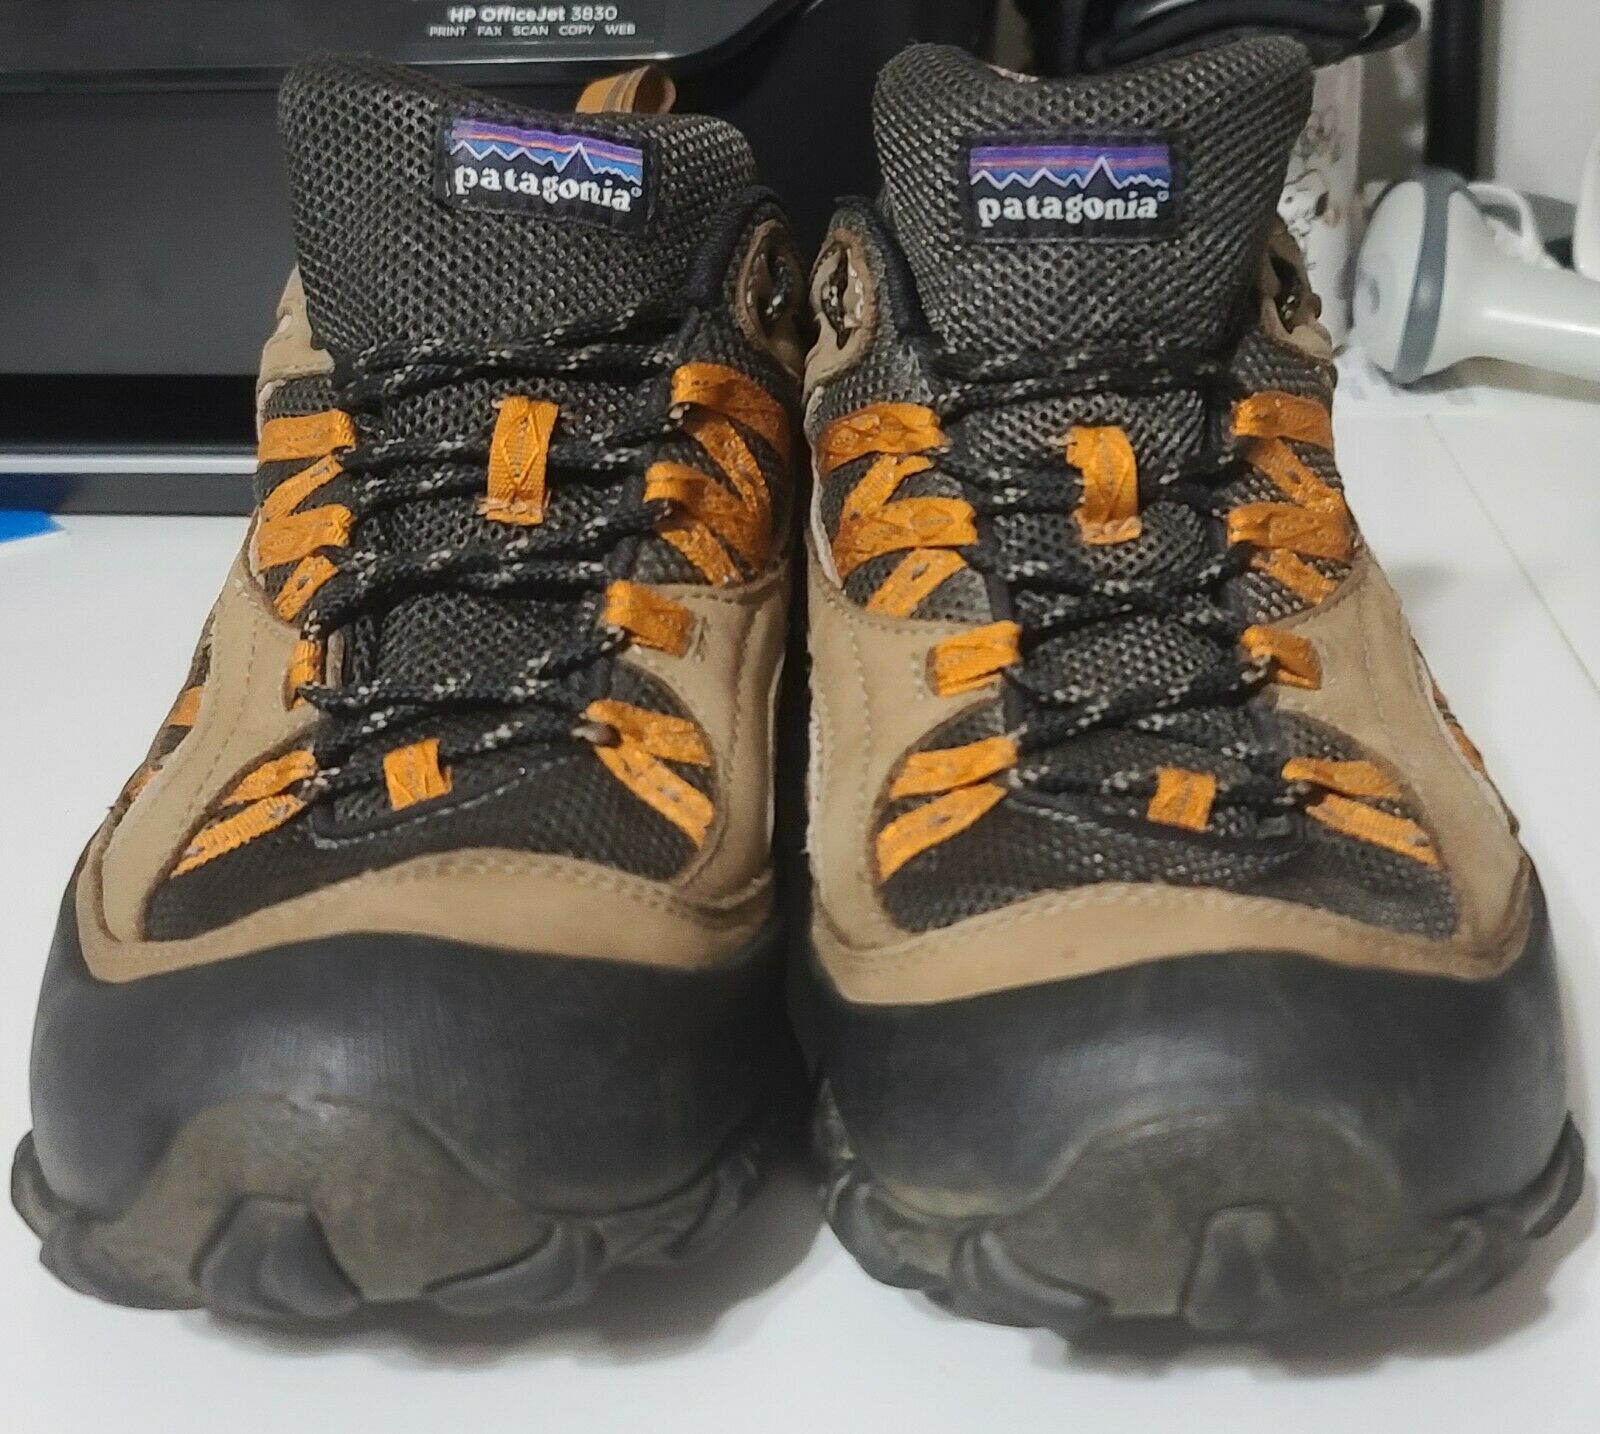 Patagonia Drifter Mens Hiking Shoes Boots Drifter Brown US Size 11